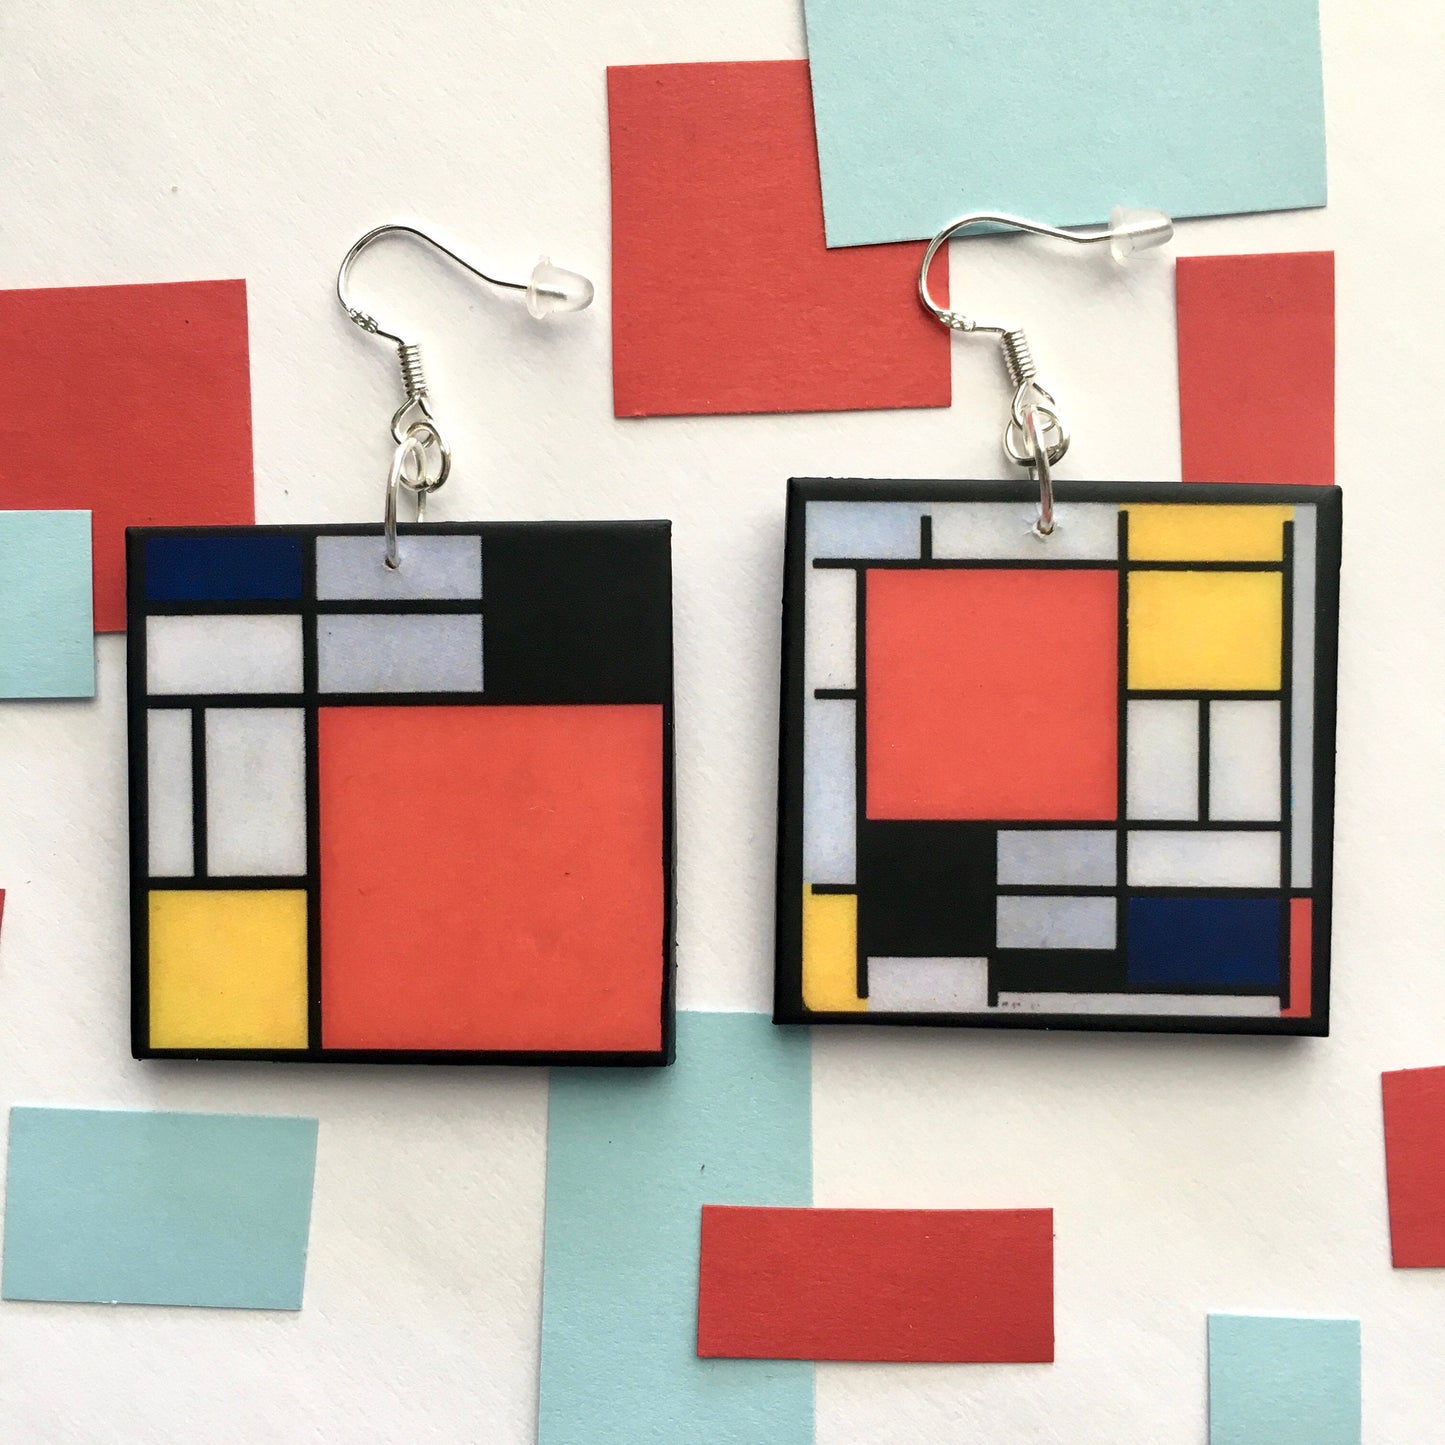 Mismatched earrings inspired by Mondrian.